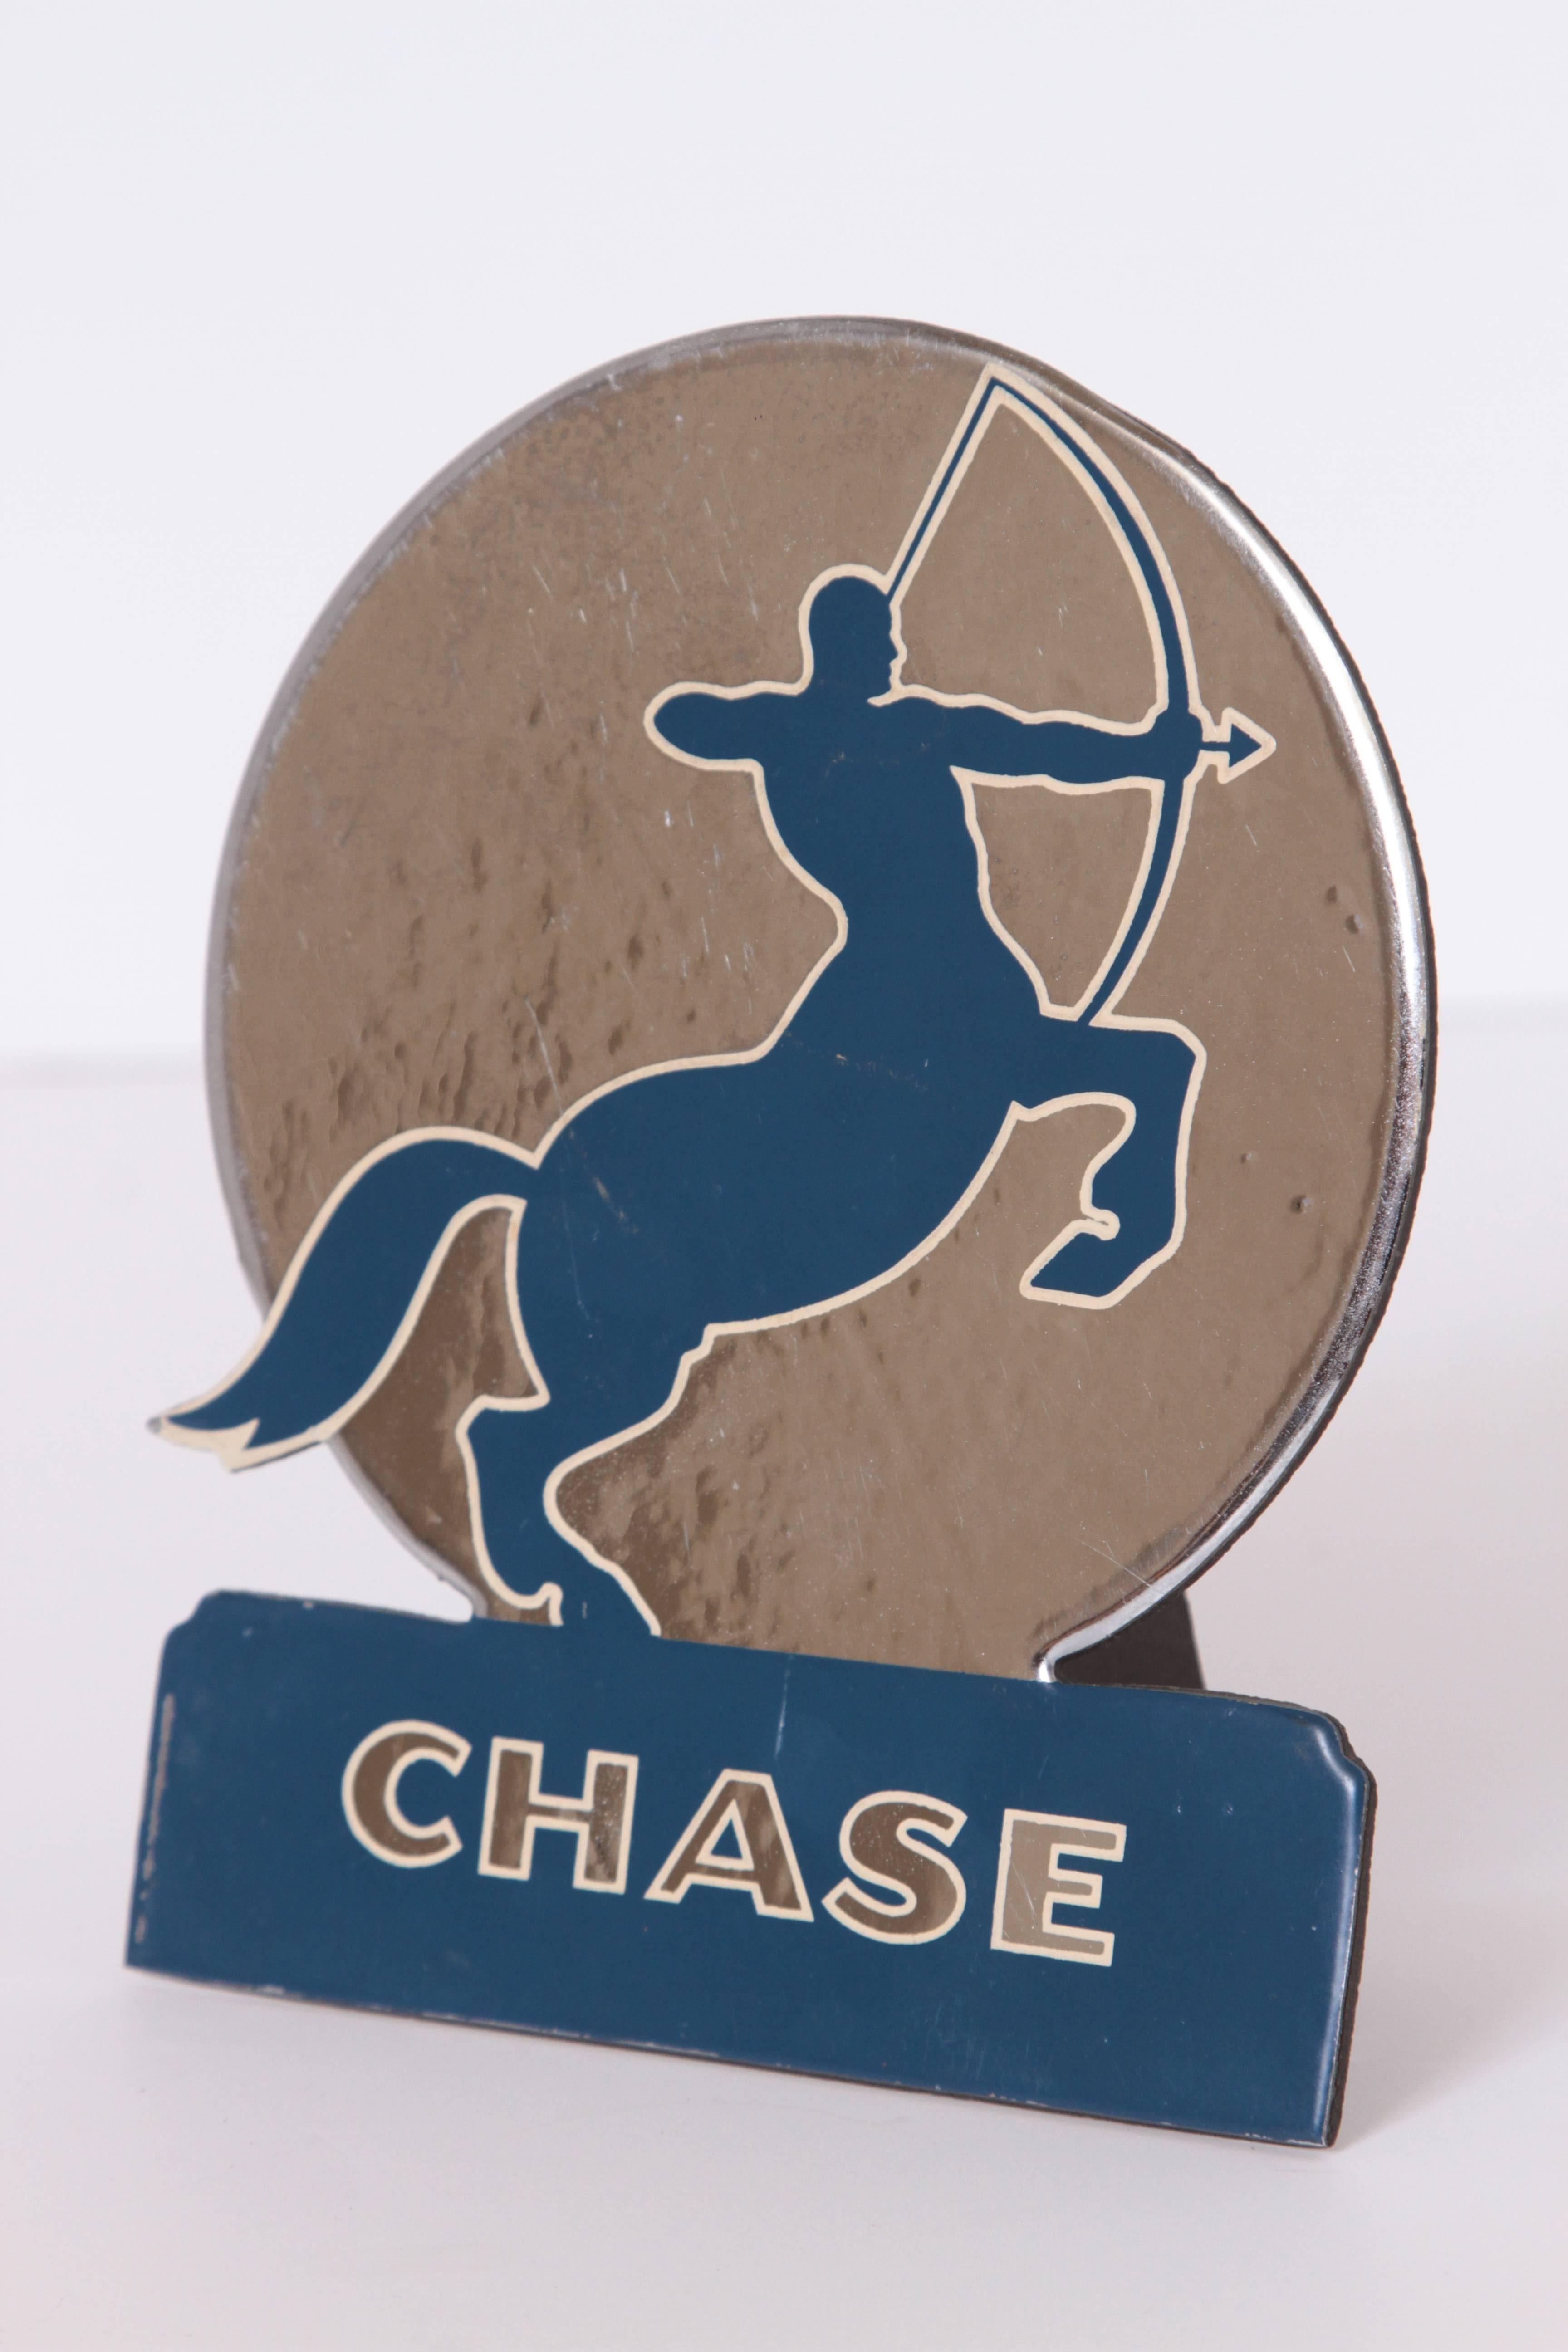 Art Deco 1930s chase brass and copper company advertising stand.

Rare iconic chase centaur with long-bow logo.
Embossed foil in silver, blue and white over cardboard counter-top foldout stand.
Extremely difficult to source vintage advertising